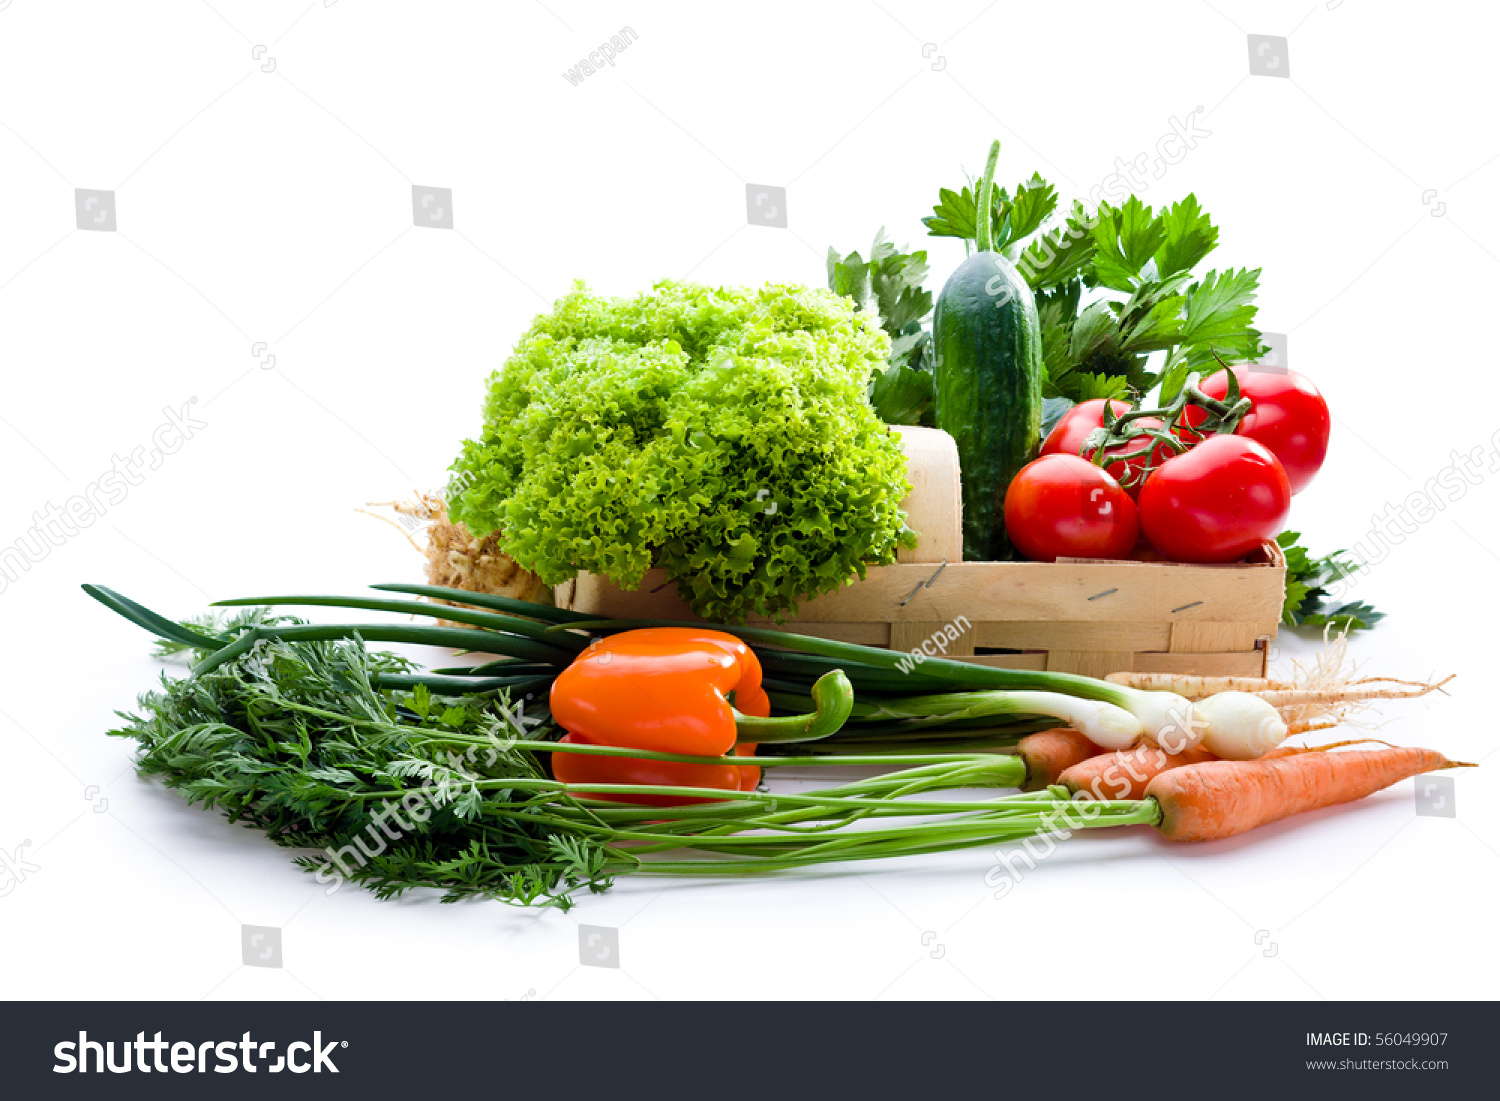 Juicy Vegetables In Punnet On White Background Stock Photo 56049907 ...